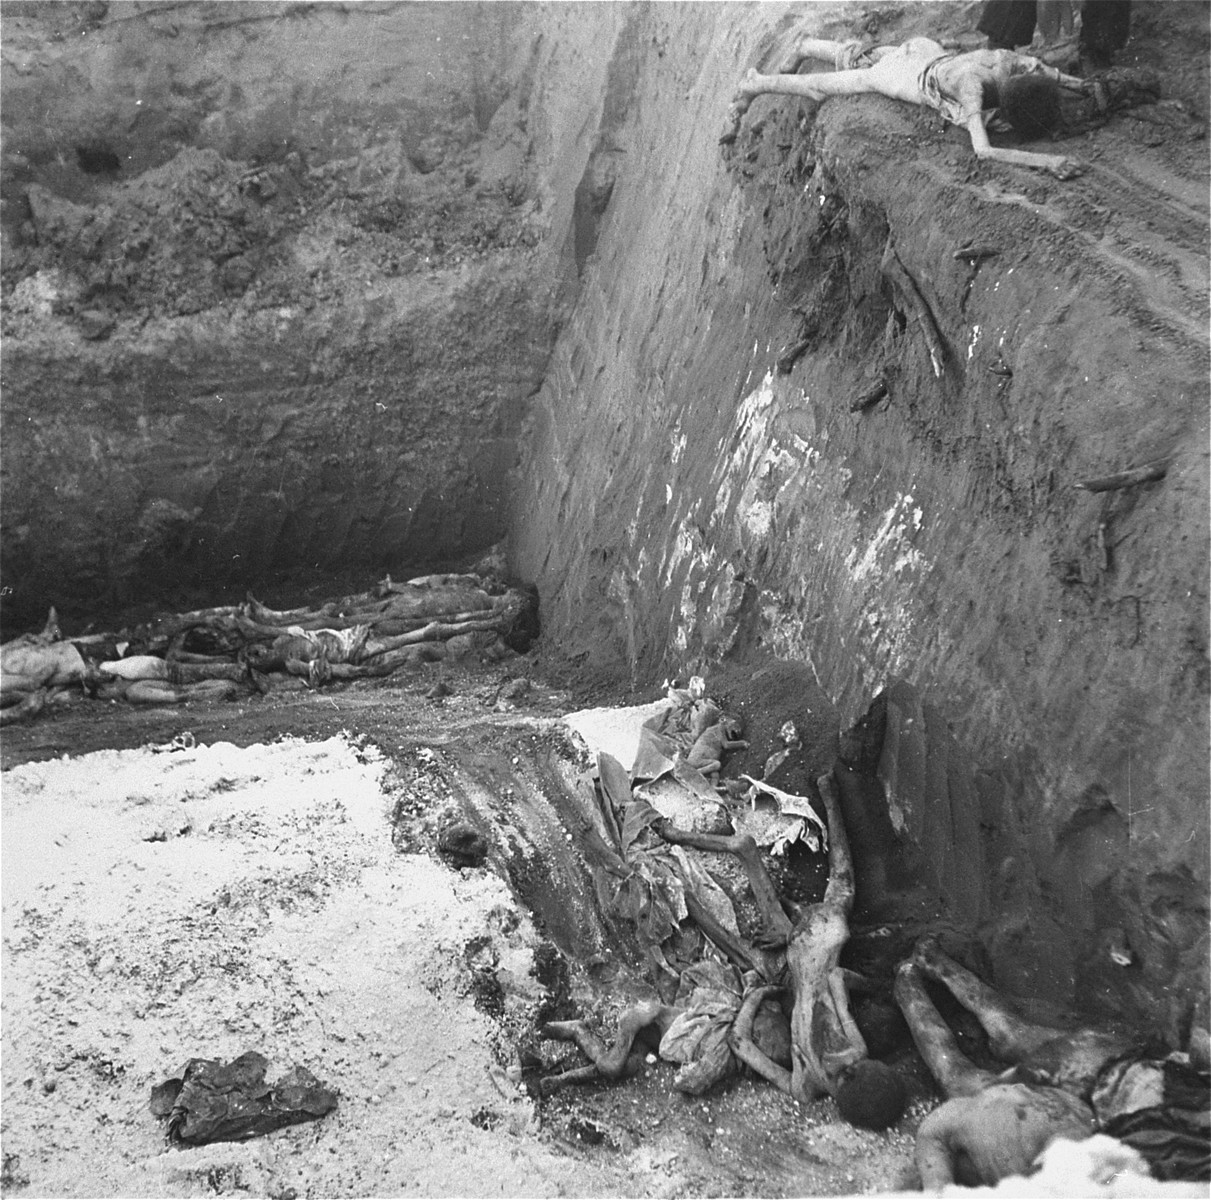 Corpses at the bottom of a mass grave in the Okopowa Street cemetery.  

Joest's caption reads: "Between all of the bodies of adults thrown into the grave, lay also [that of] a small dead child."